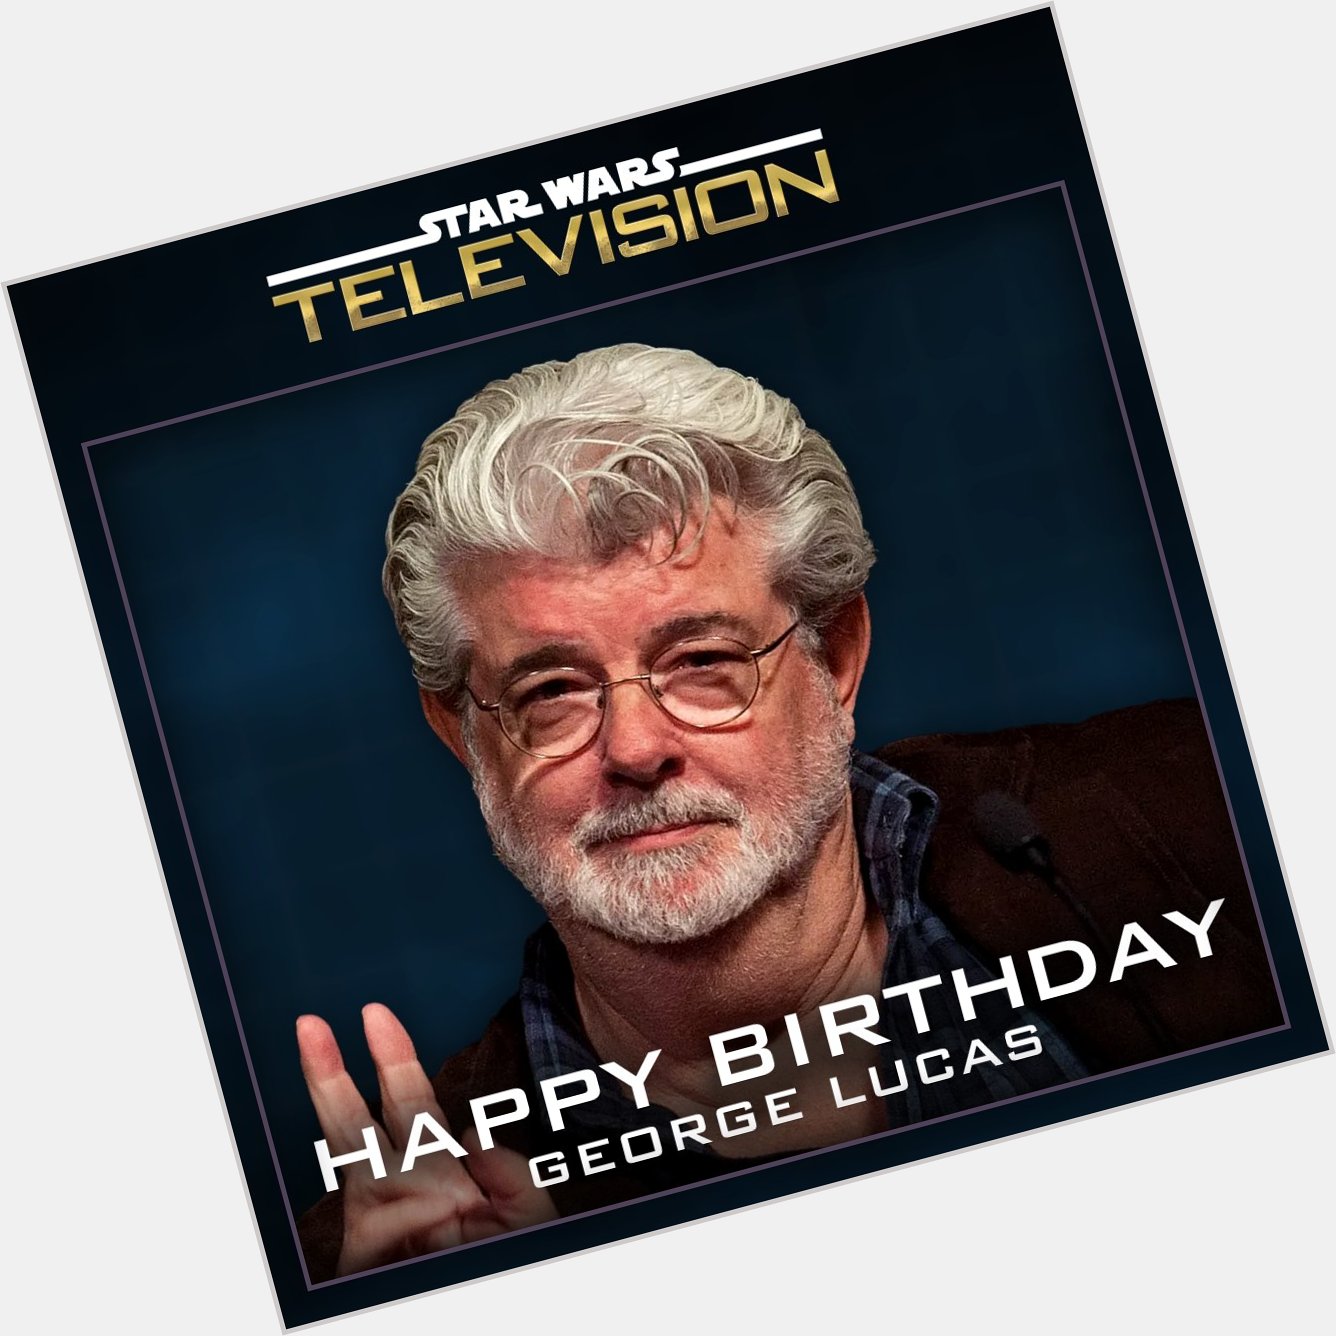 A big happy birthday to the maker, George Lucas!  